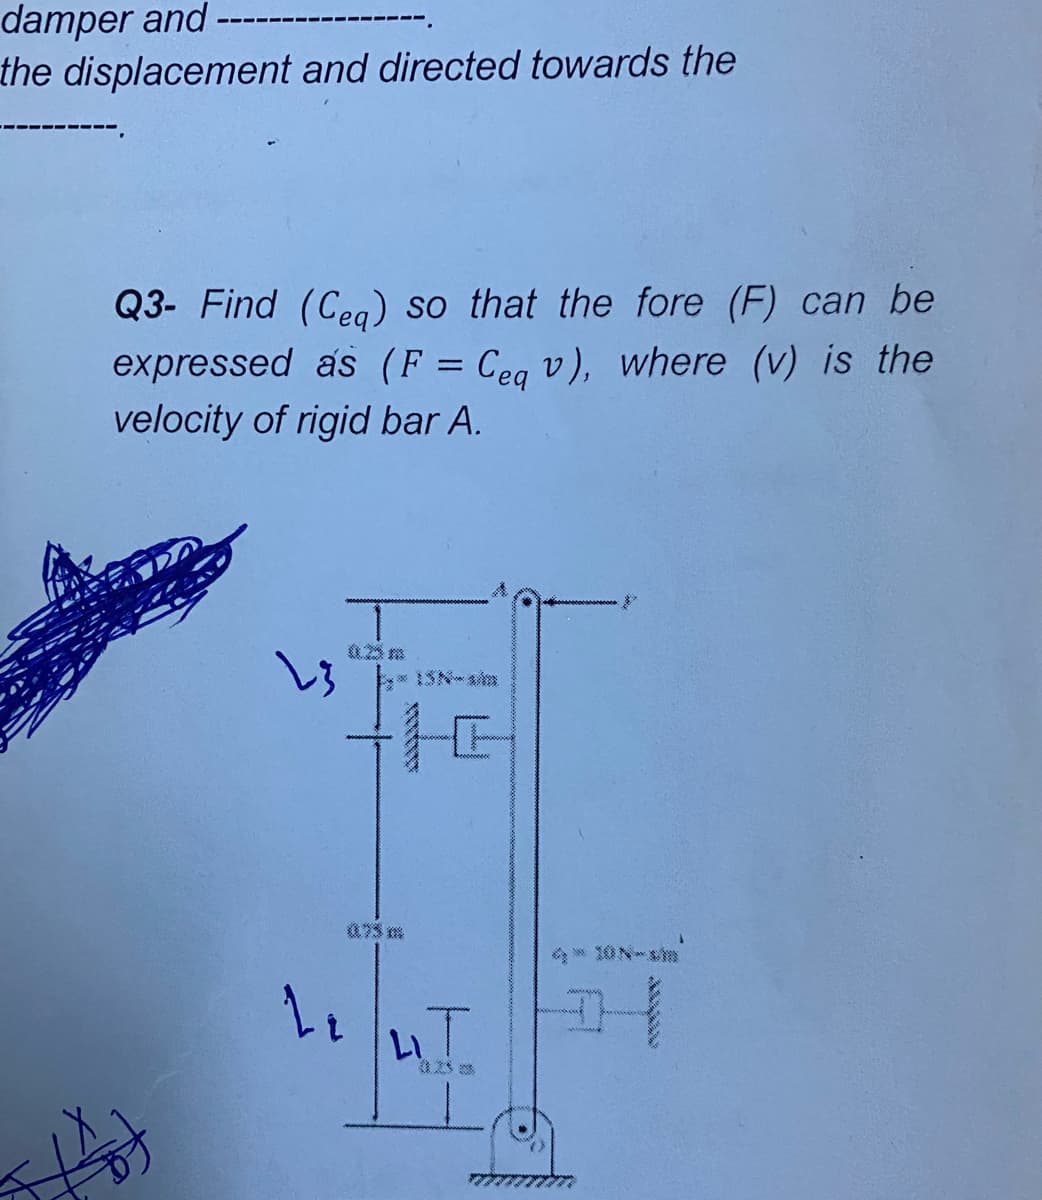 damper and
the displacement and directed towards the
Q3- Find (Cea) so that the fore (F) can be
expressed as (F = Ceg v), where (v) is the
velocity of rigid bar A.
象
後3 路
4* 10N-s
中
い!
0.25 s
